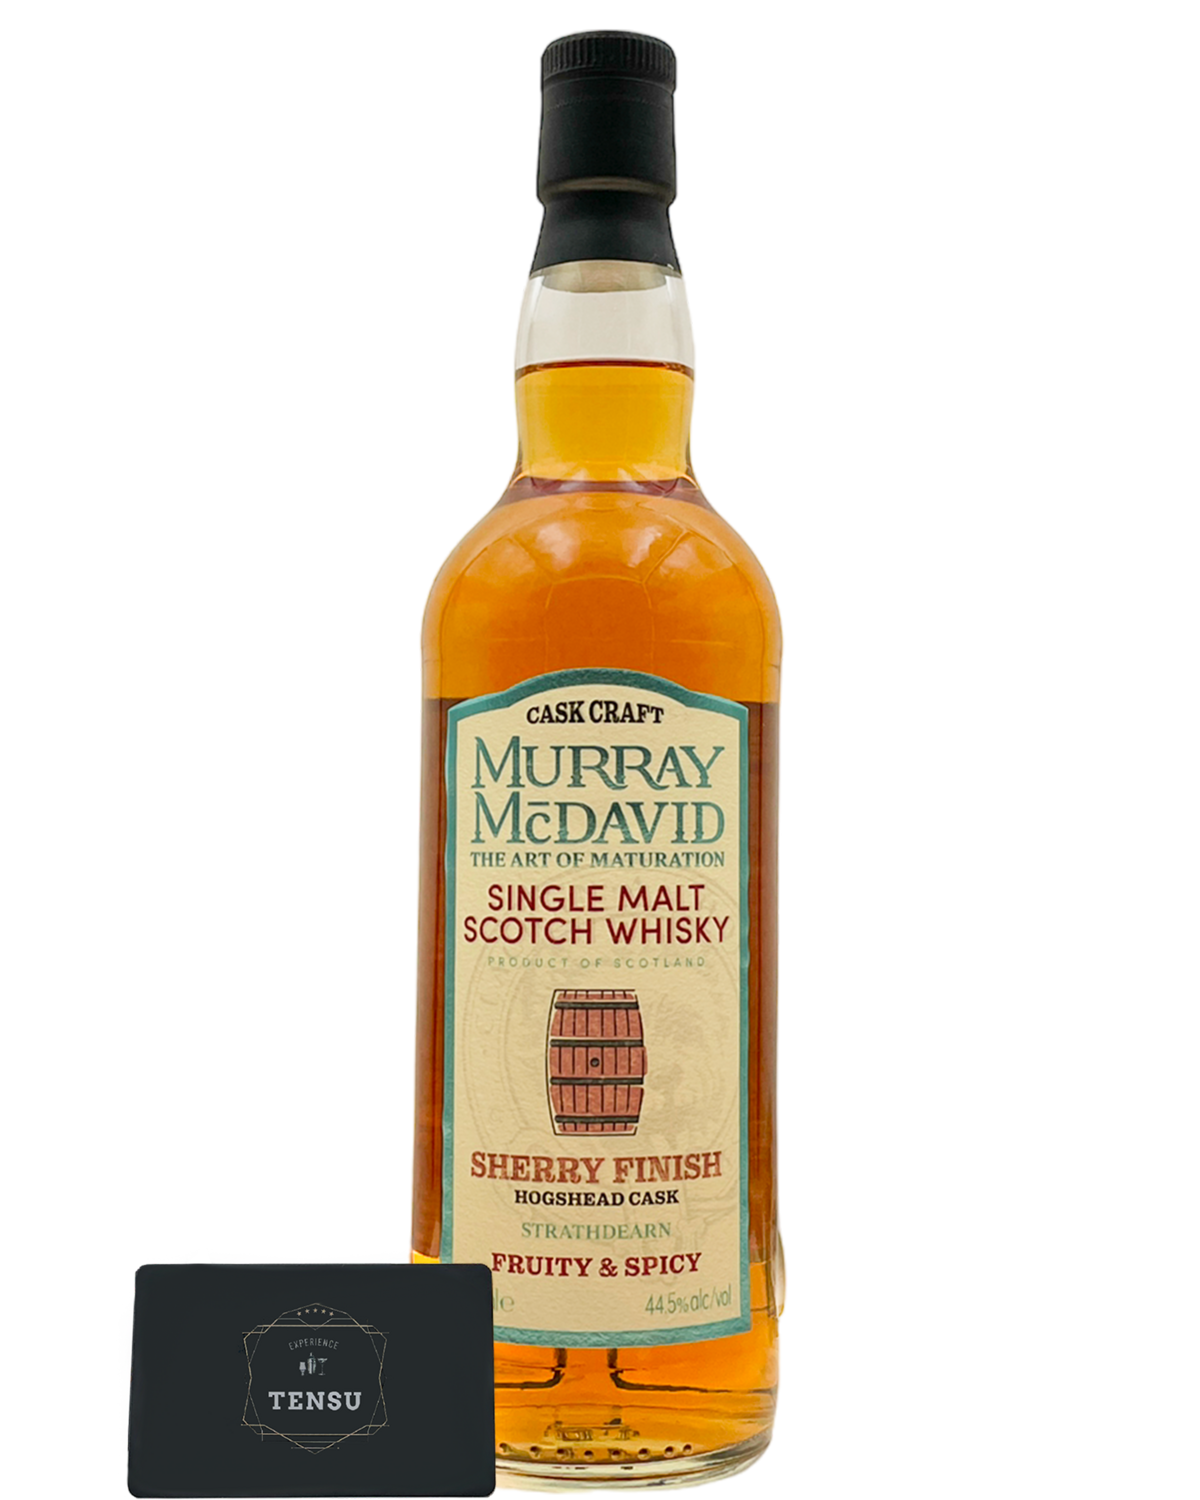 Strathdearn NAS Fruity &amp; Spicy (2022) Cask Craft Sherry Finish 44.5 #SHRY-01 &quot;Murray McDavid&quot;